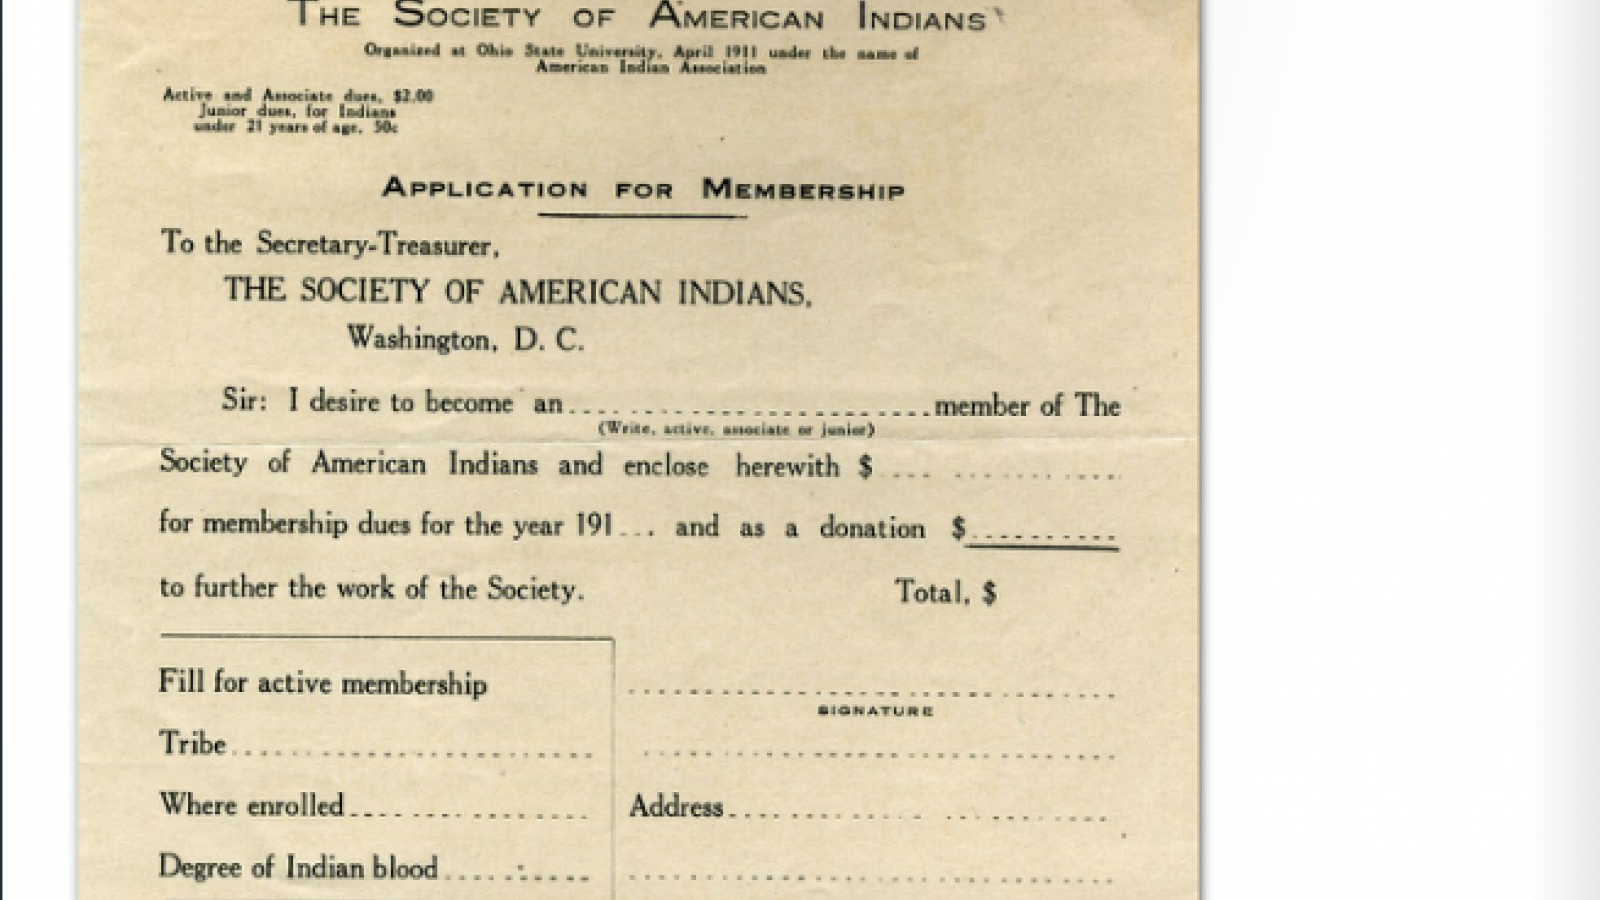 Society of American Indians Conference, Image 8